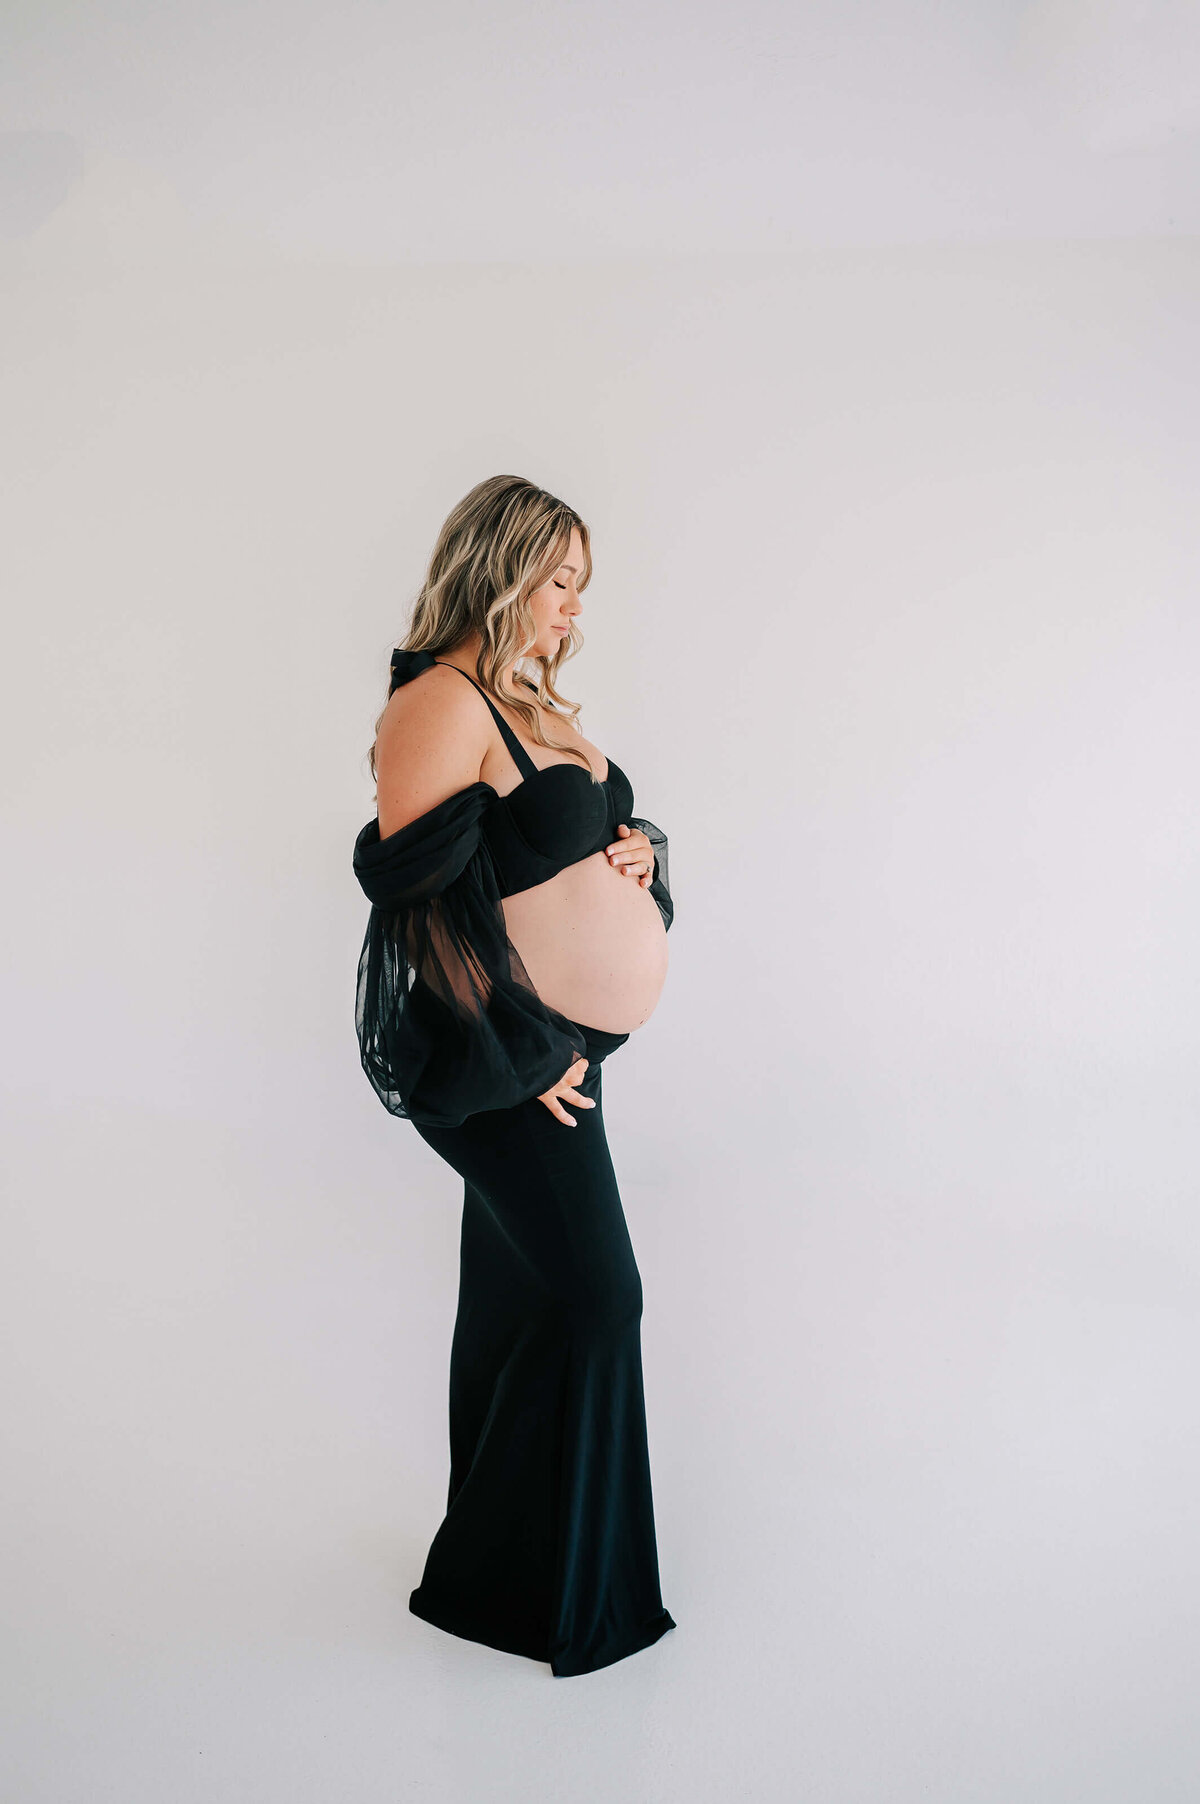 Branson MO maternity photographer Jessica Kennedy of The XO Photogrpahy captures pregnant mom holding baby bump